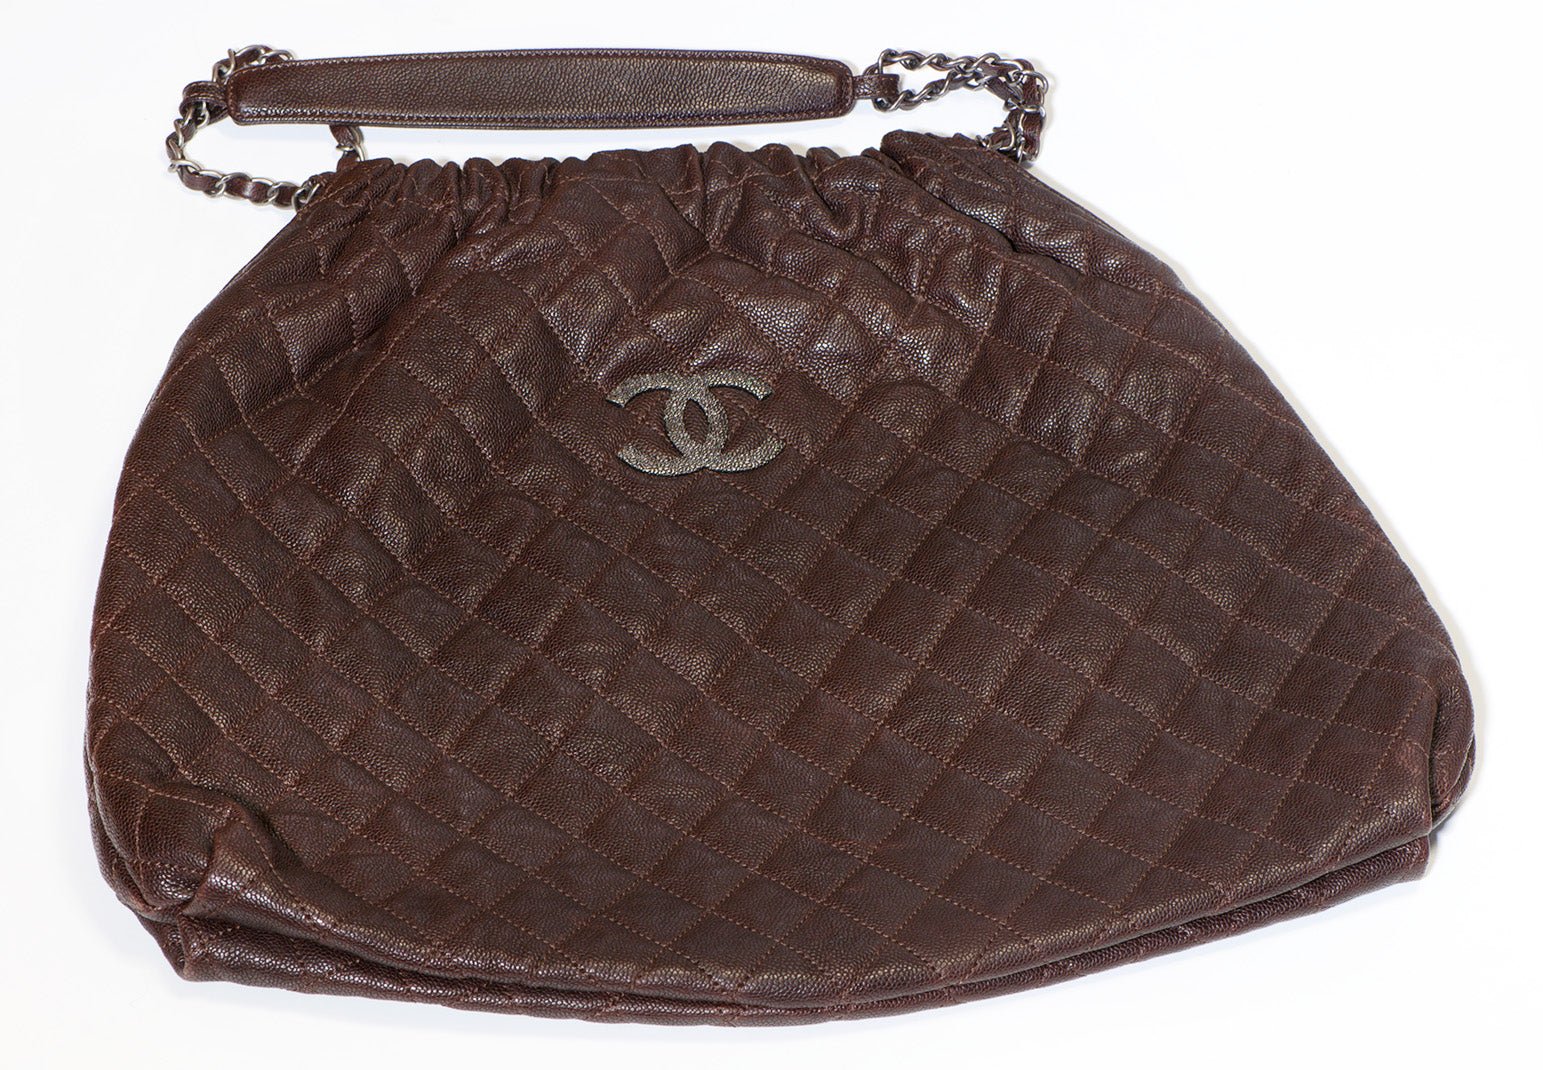 Chanel Paris CC Brown Caviar Quilted Leather Large Hobo Shoulder Bag - DSF Antique Jewelry